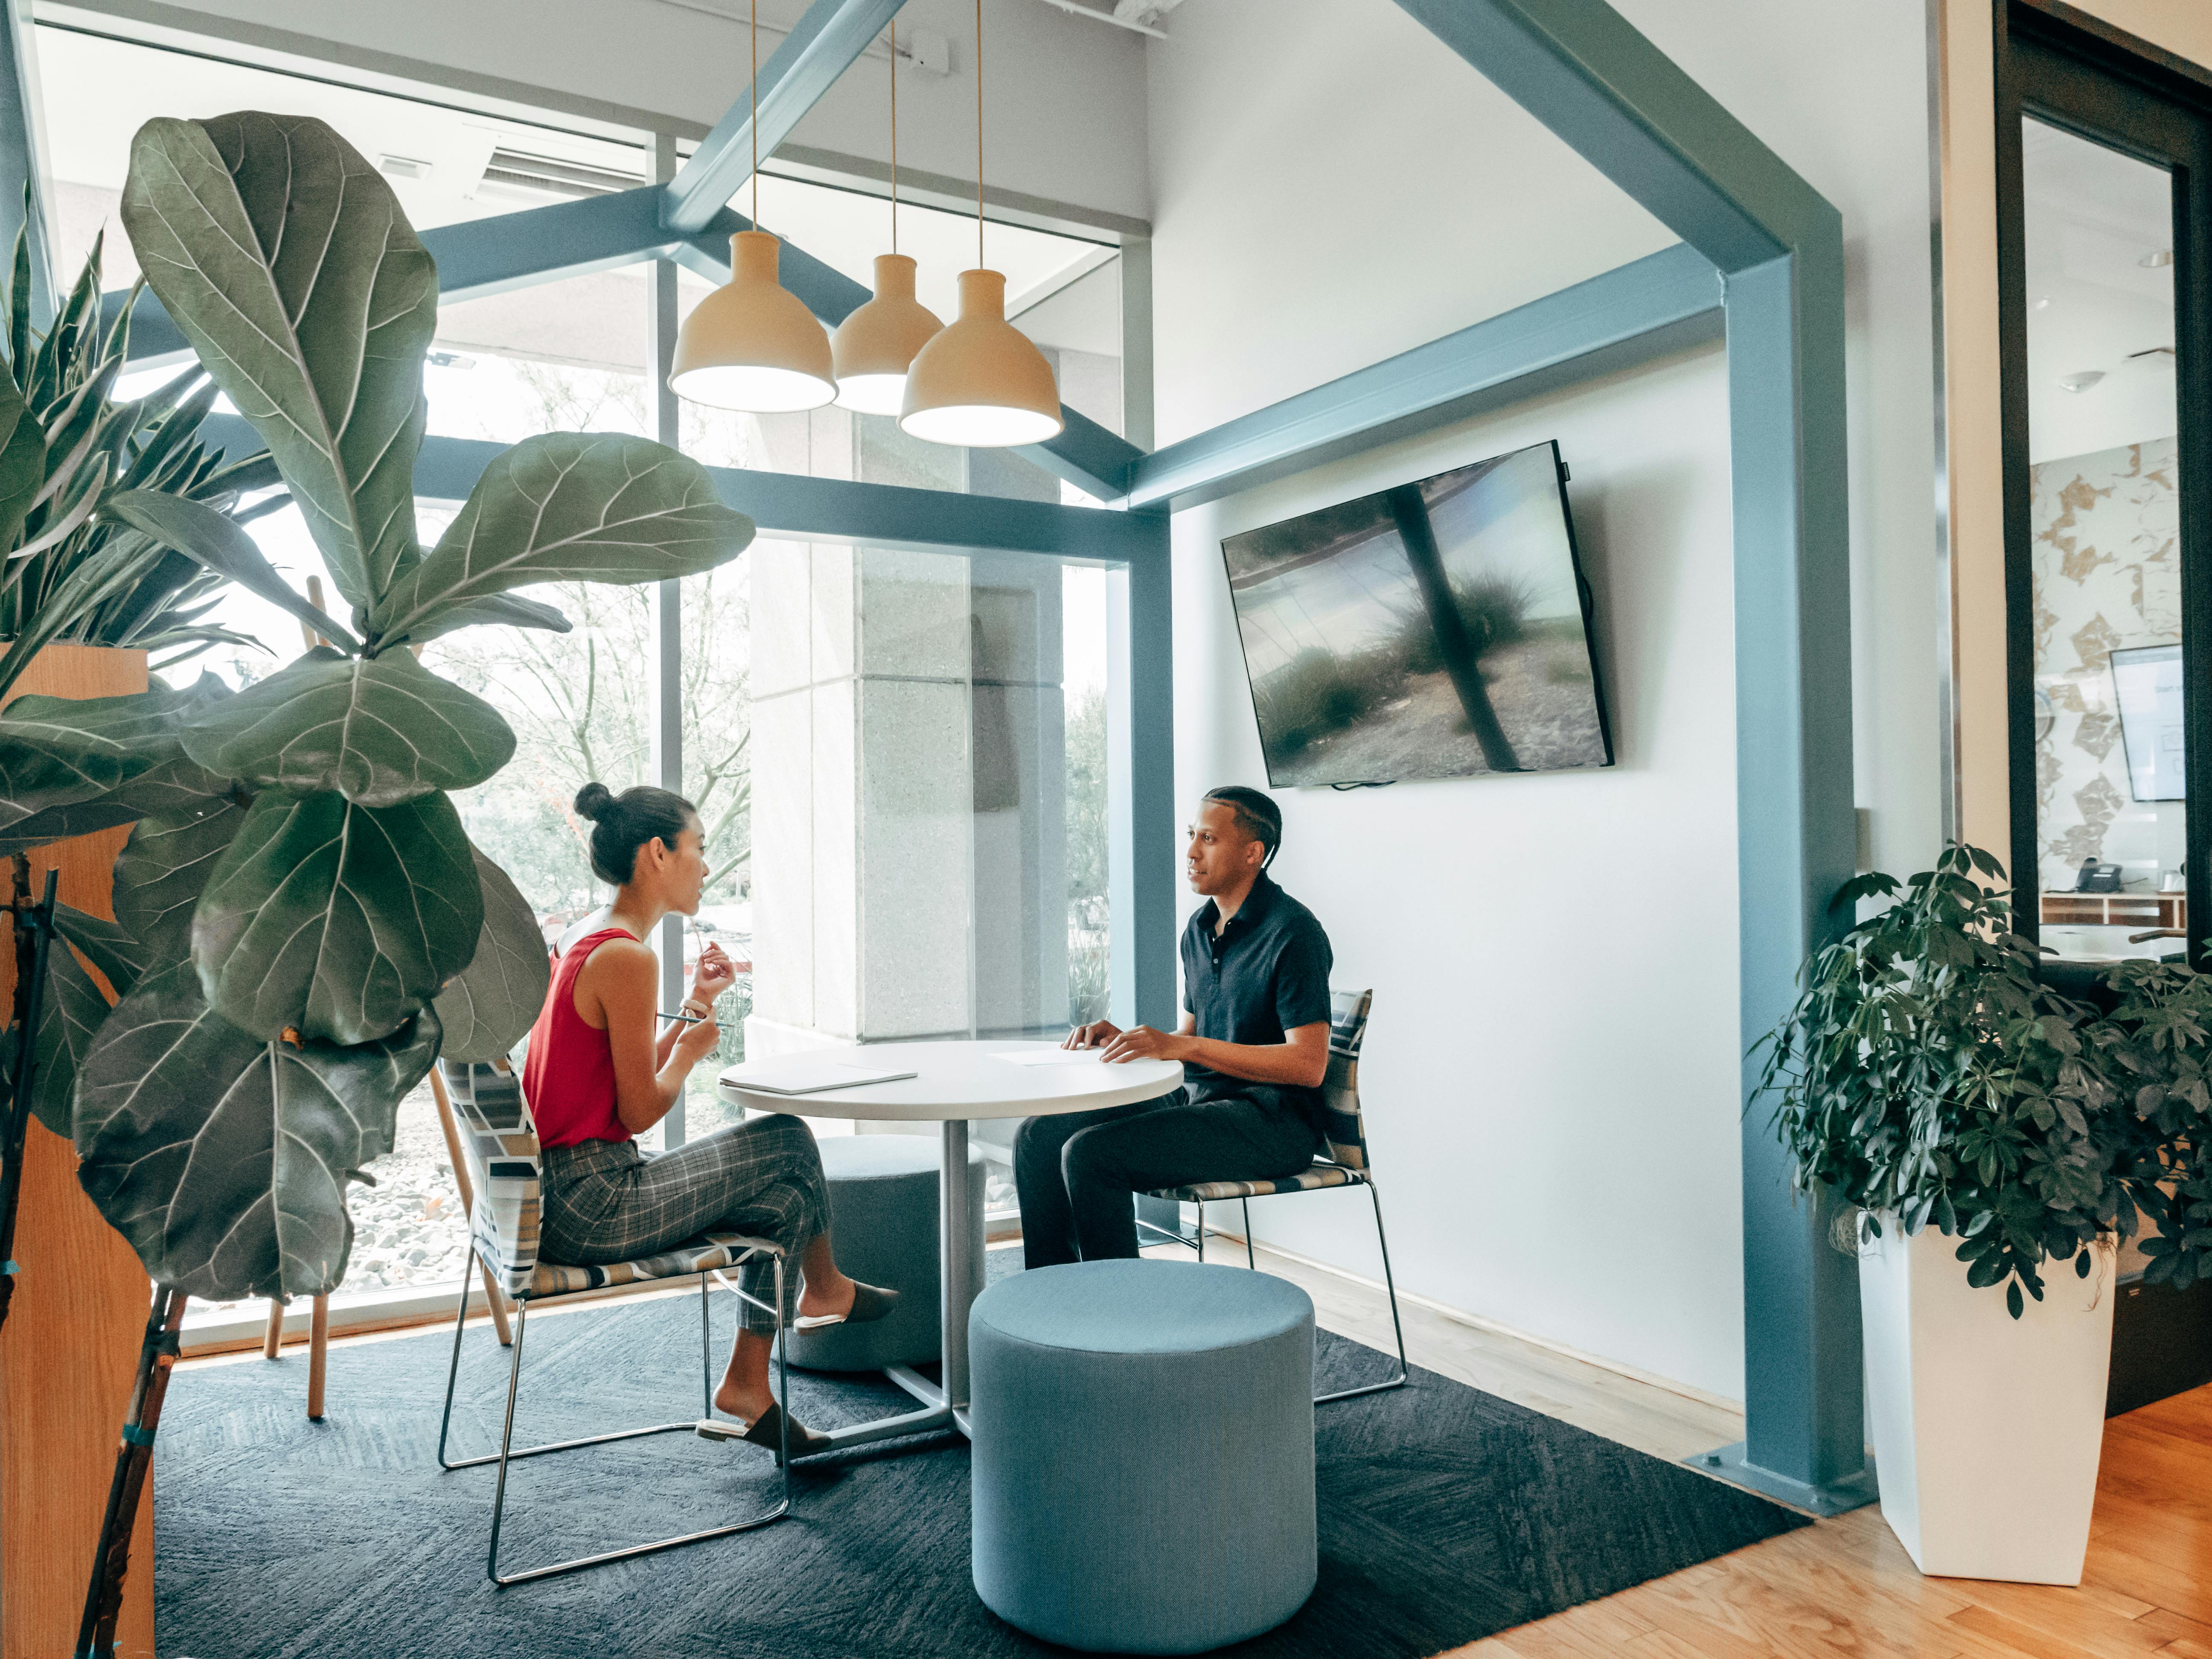 A man and a woman having a meeting in an office | Source: Pexels